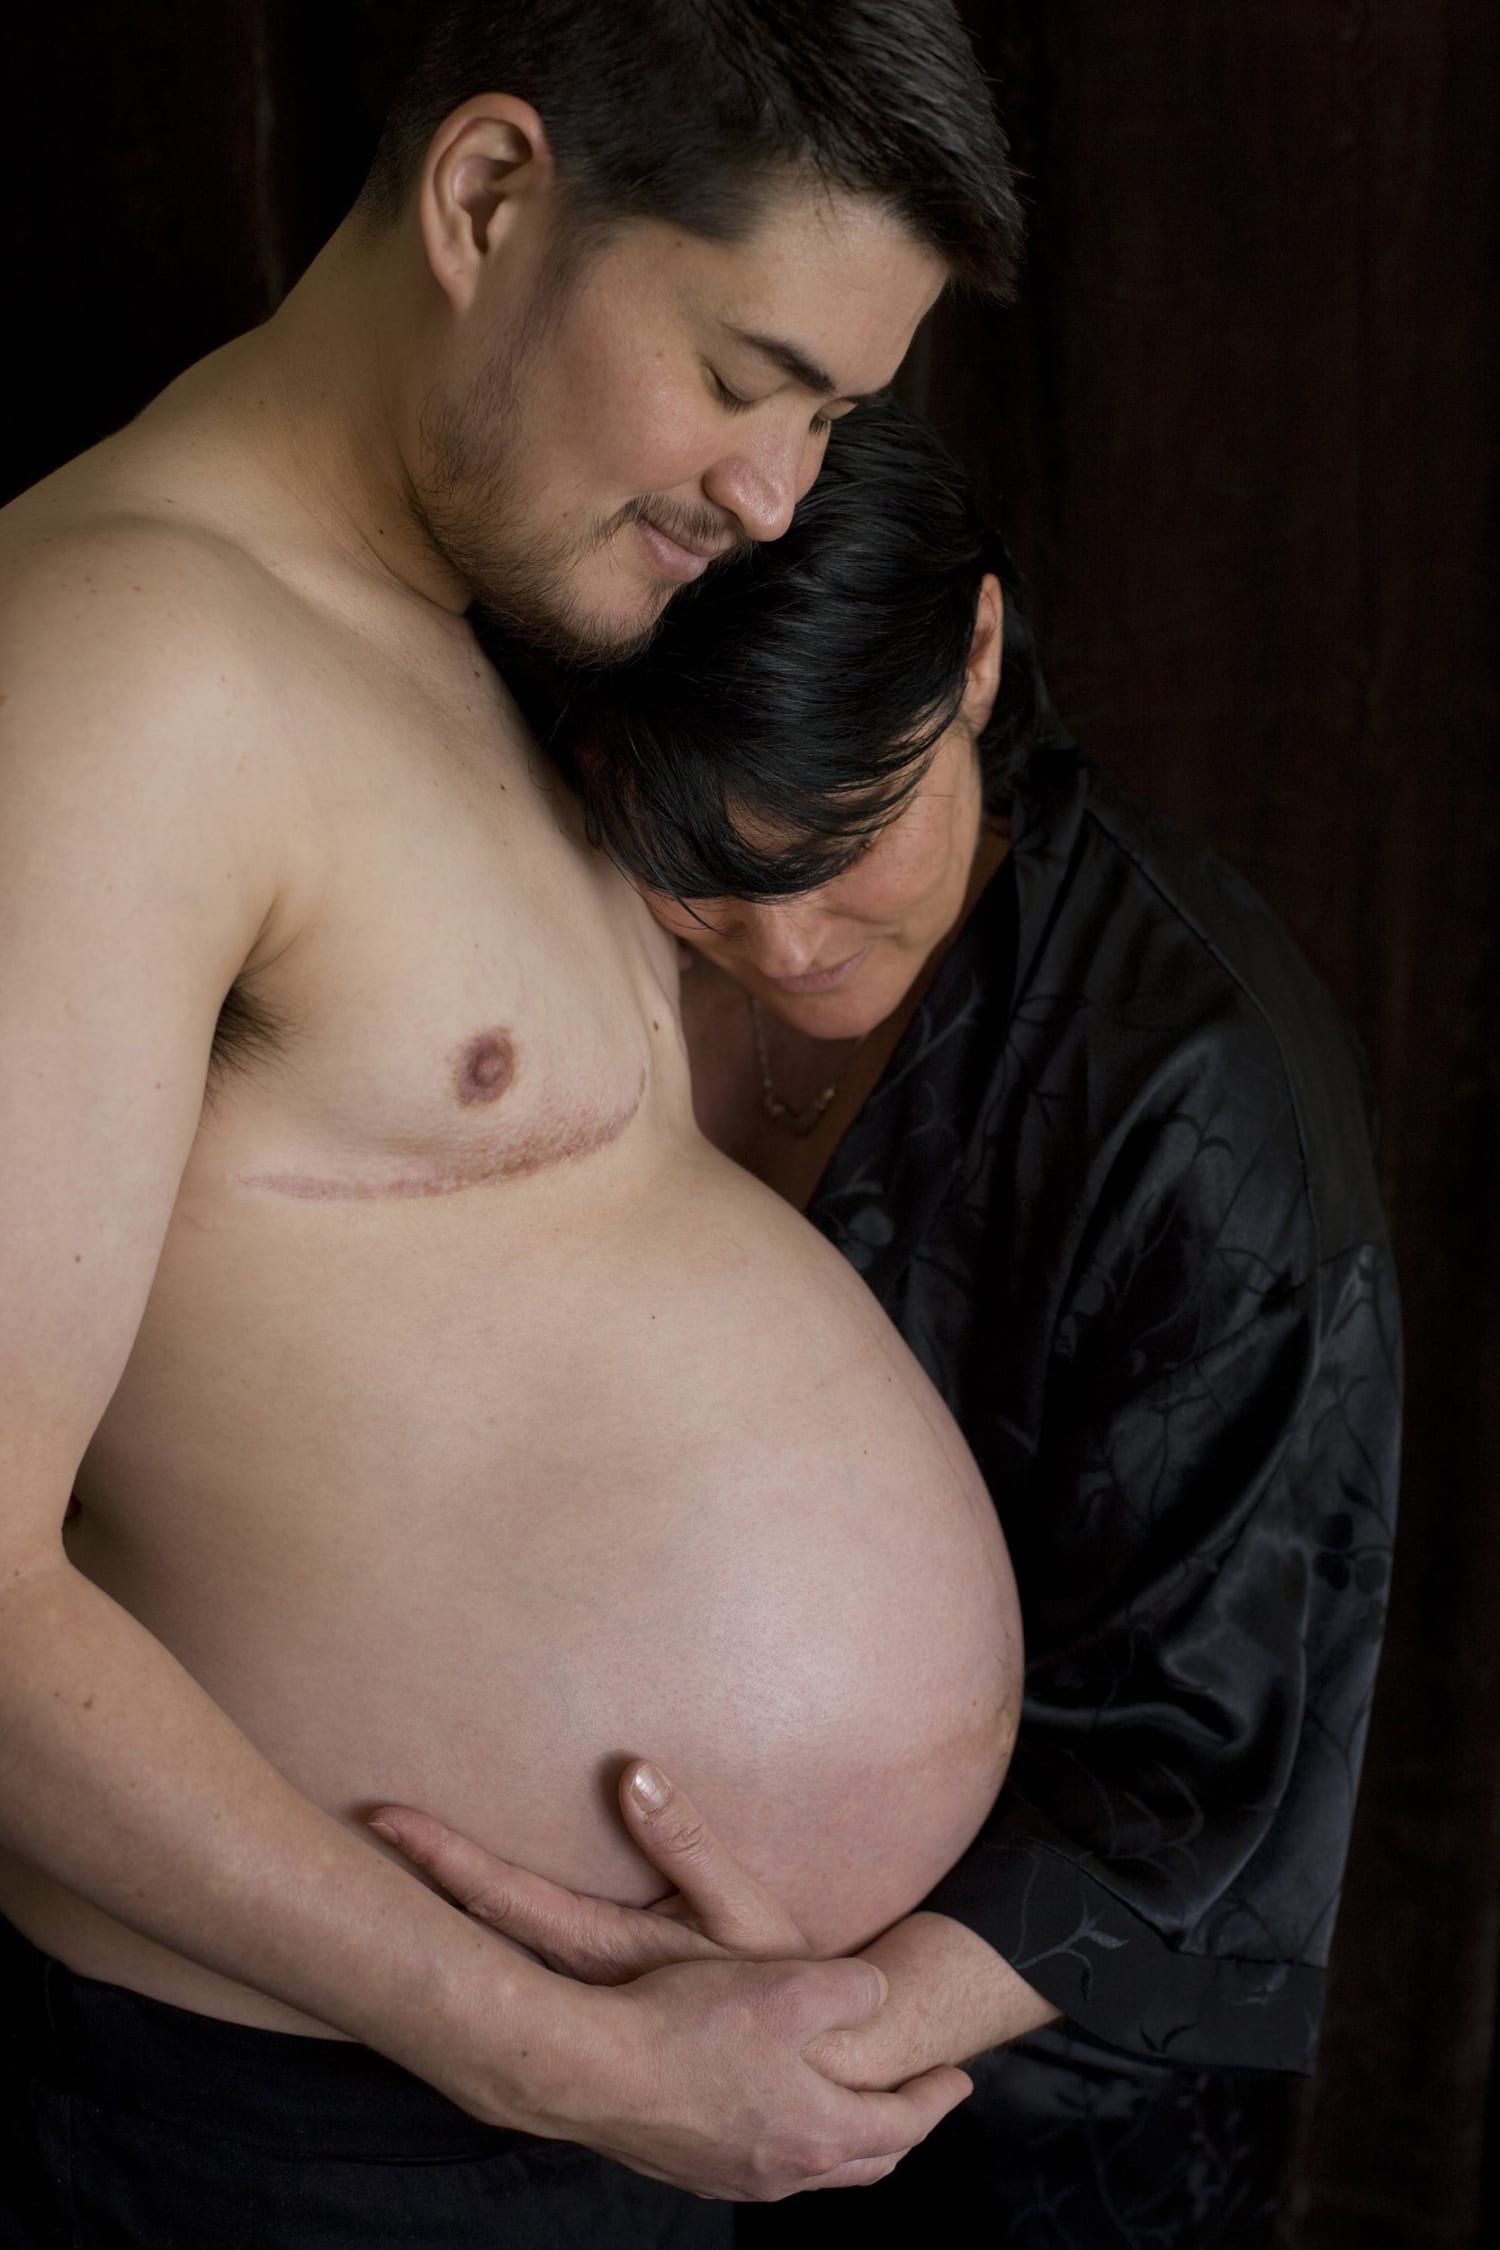 He was famous for being the pregnant man. Heres where Thomas Beatie is pic